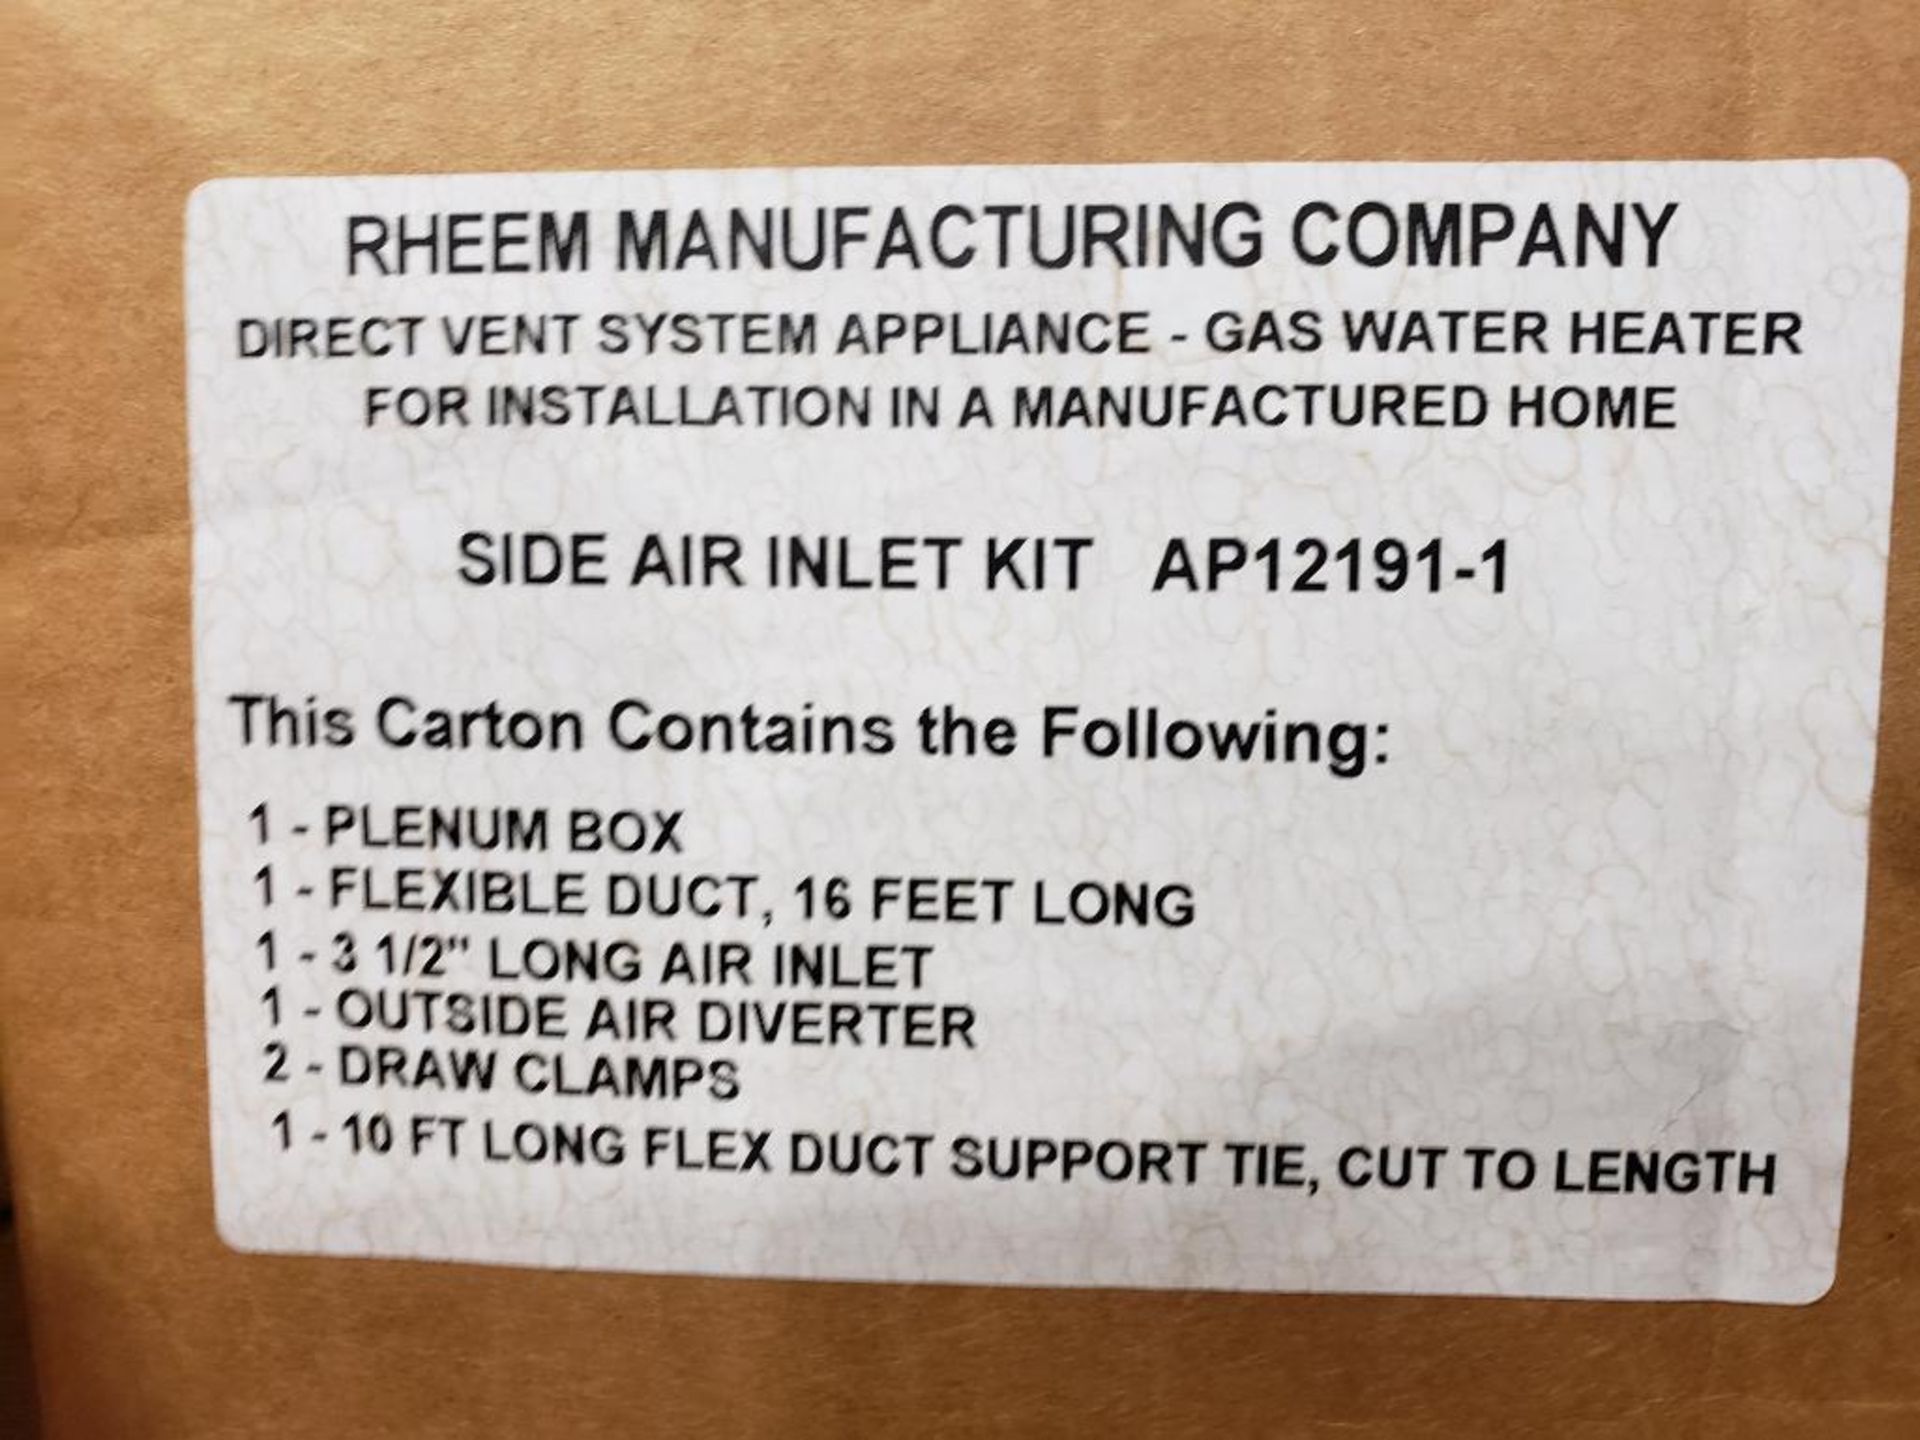 Qty 3 - Rheem inlet assembly kit. Part number AP12191-1. - Image 2 of 5